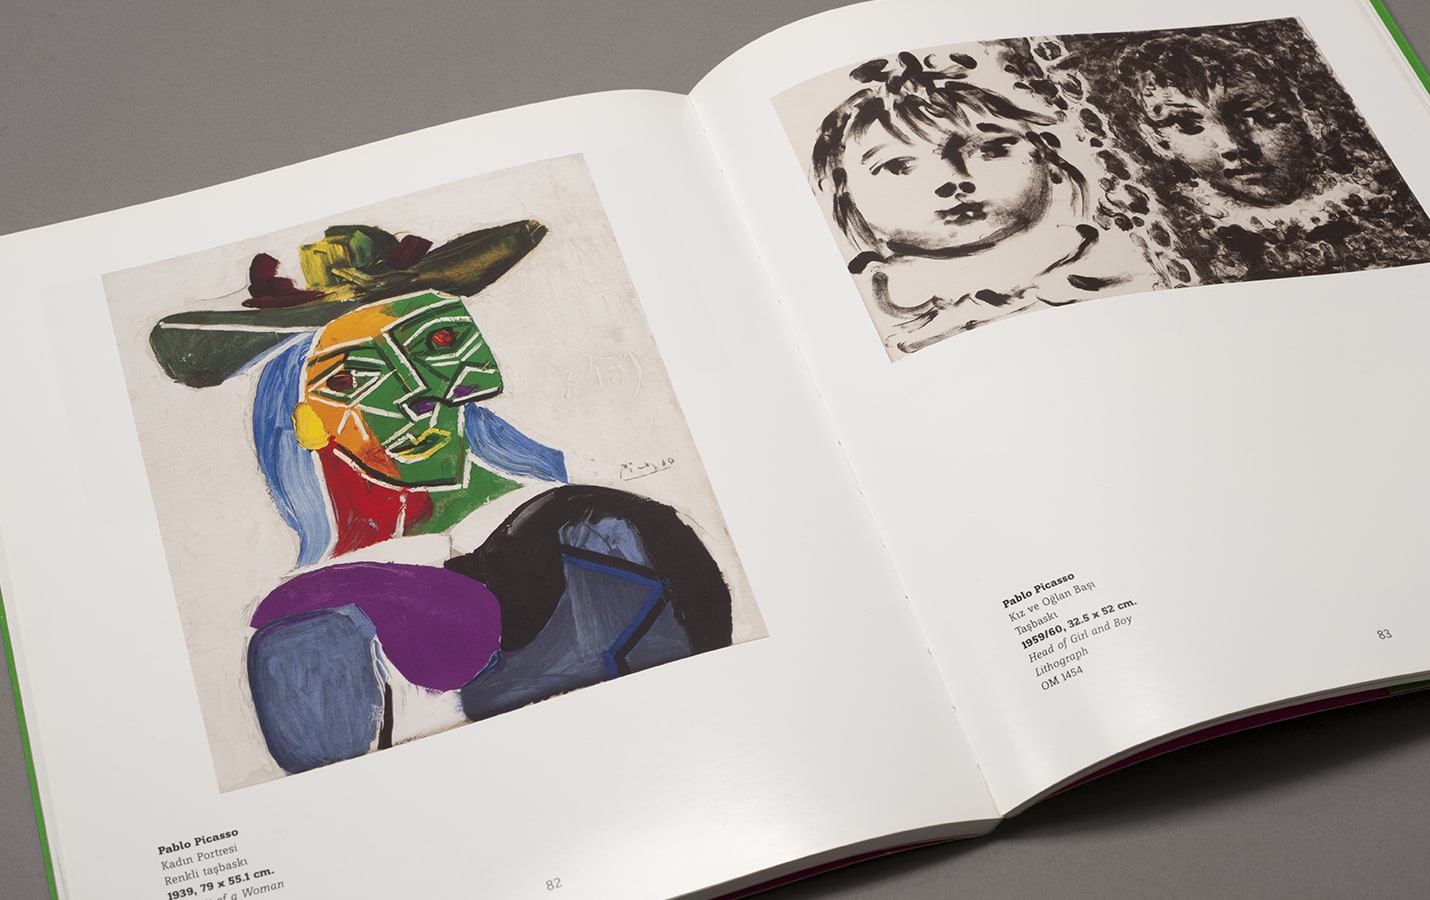 Prints, Drawings, Watercolors by the Masters of the 20th Century